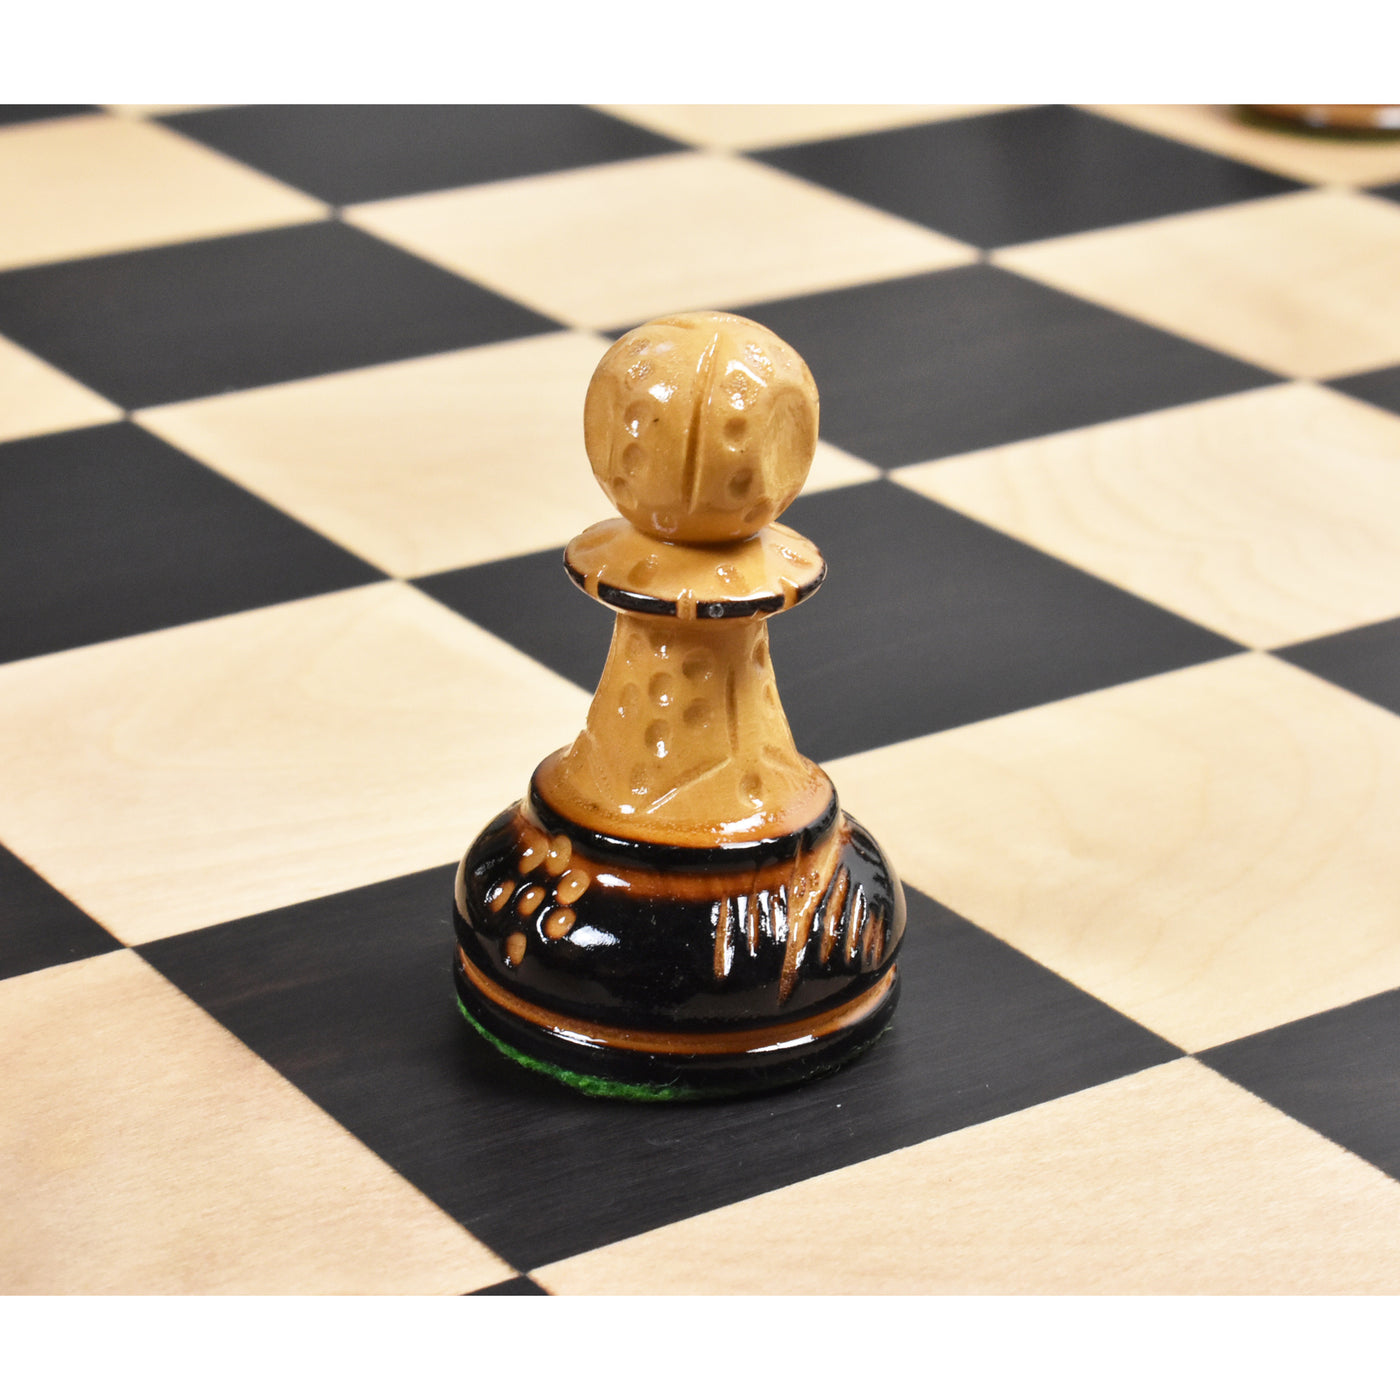 1970s' Dubrovnik Chess Pieces Only Set | Dubrovnik Chess | Luxury Chess Pieces